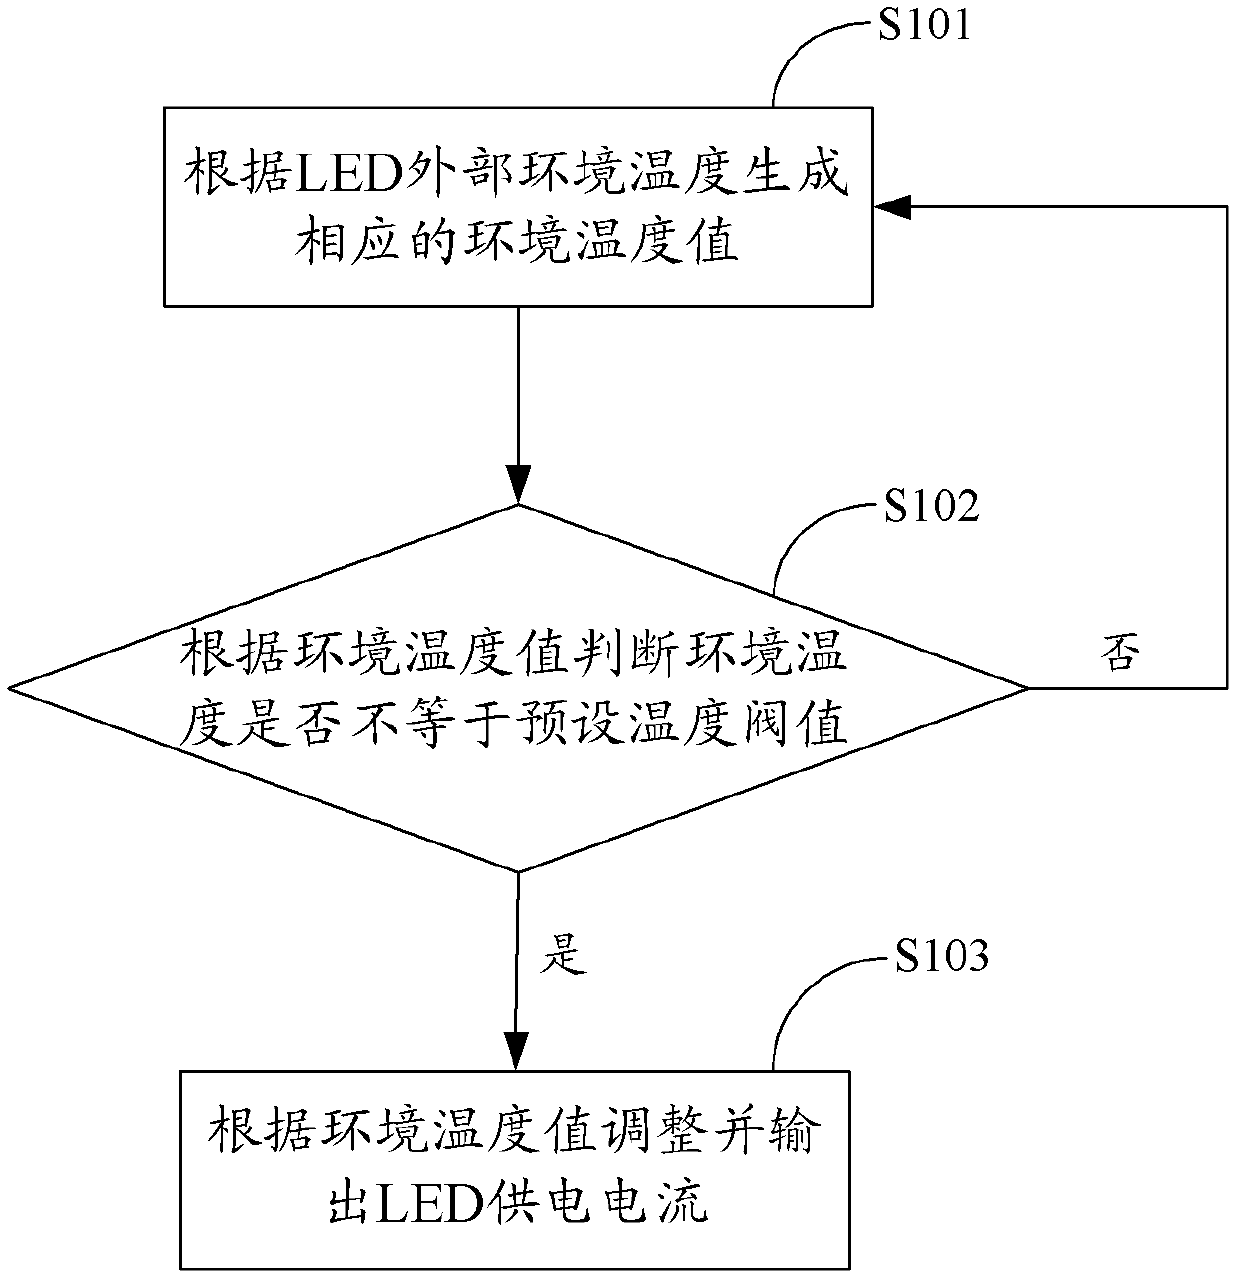 LED (light-emitting-diode) driving method and device